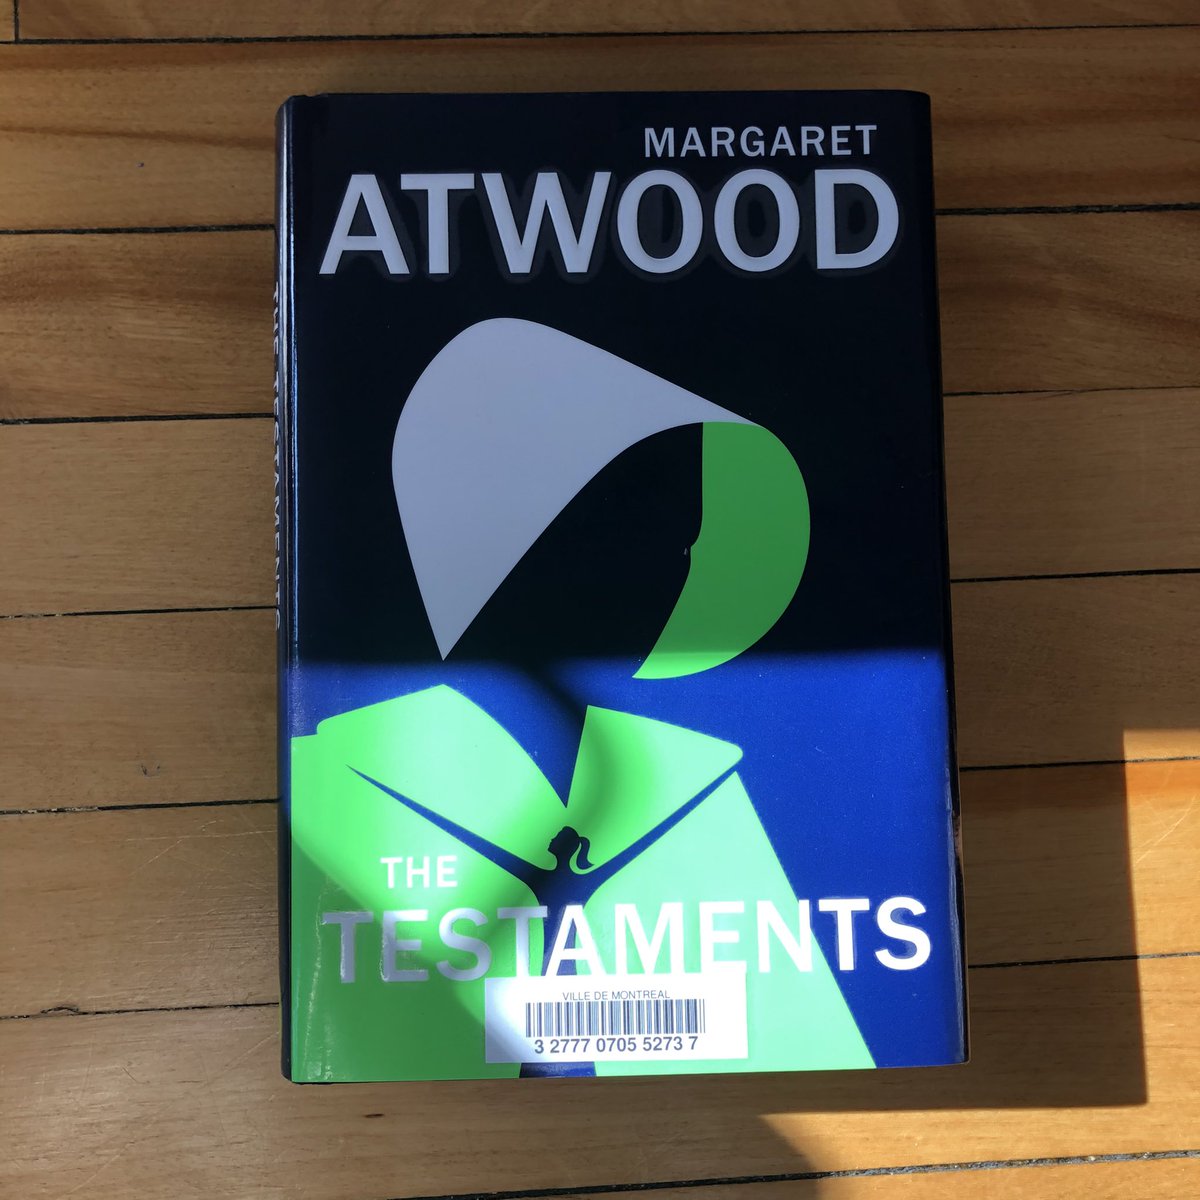 27/52The Testaments by Margaret Atwood.  #52booksin52weeks  #2020books  #booksof2020  #pandemicreading